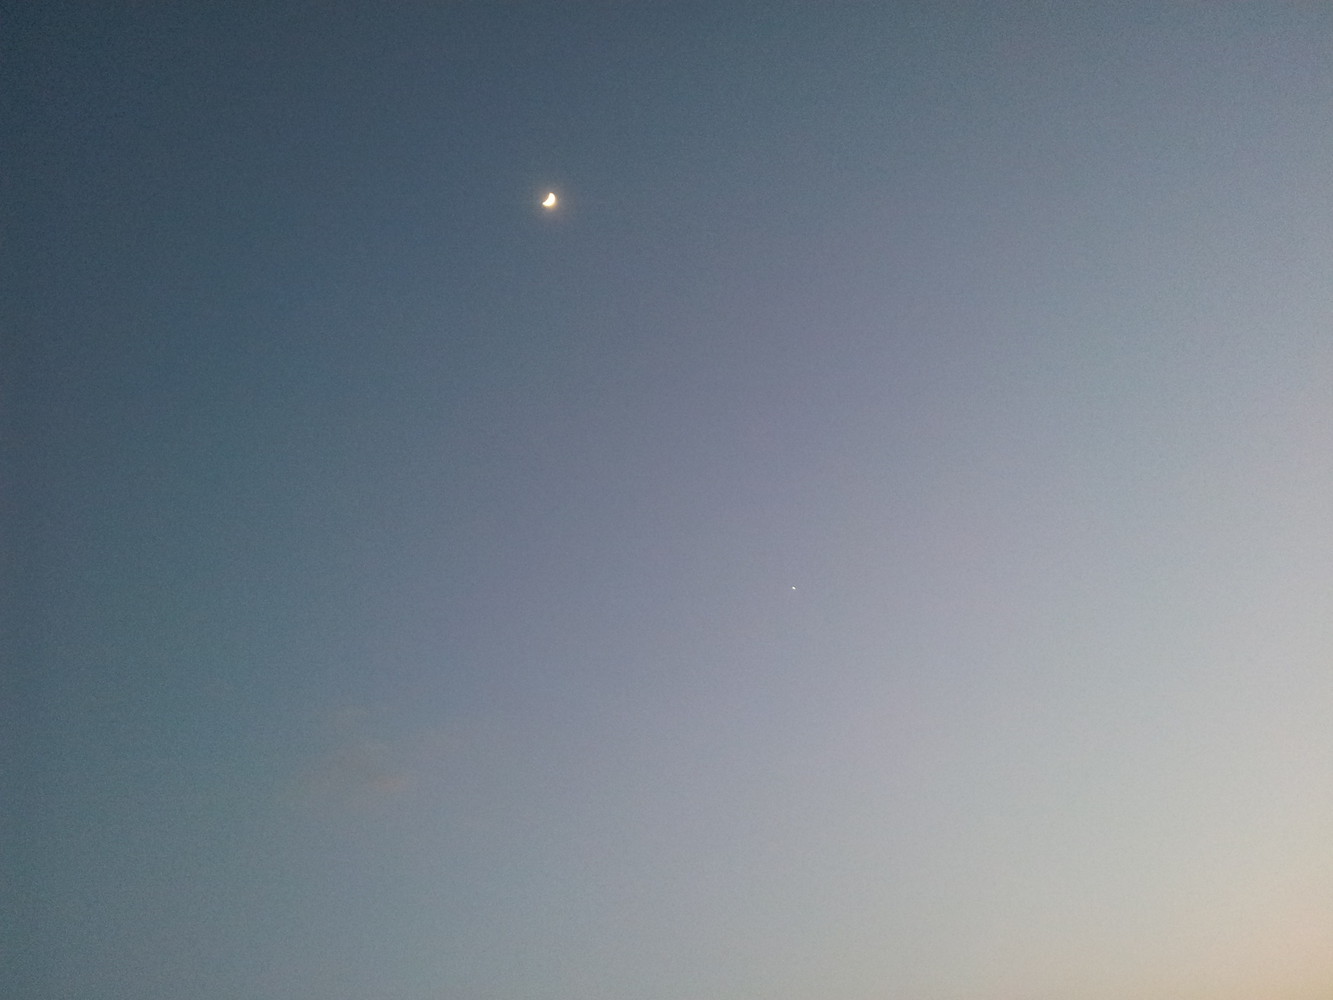 Crescent moon with Venus appearing as a tiny white dot to its bottom right